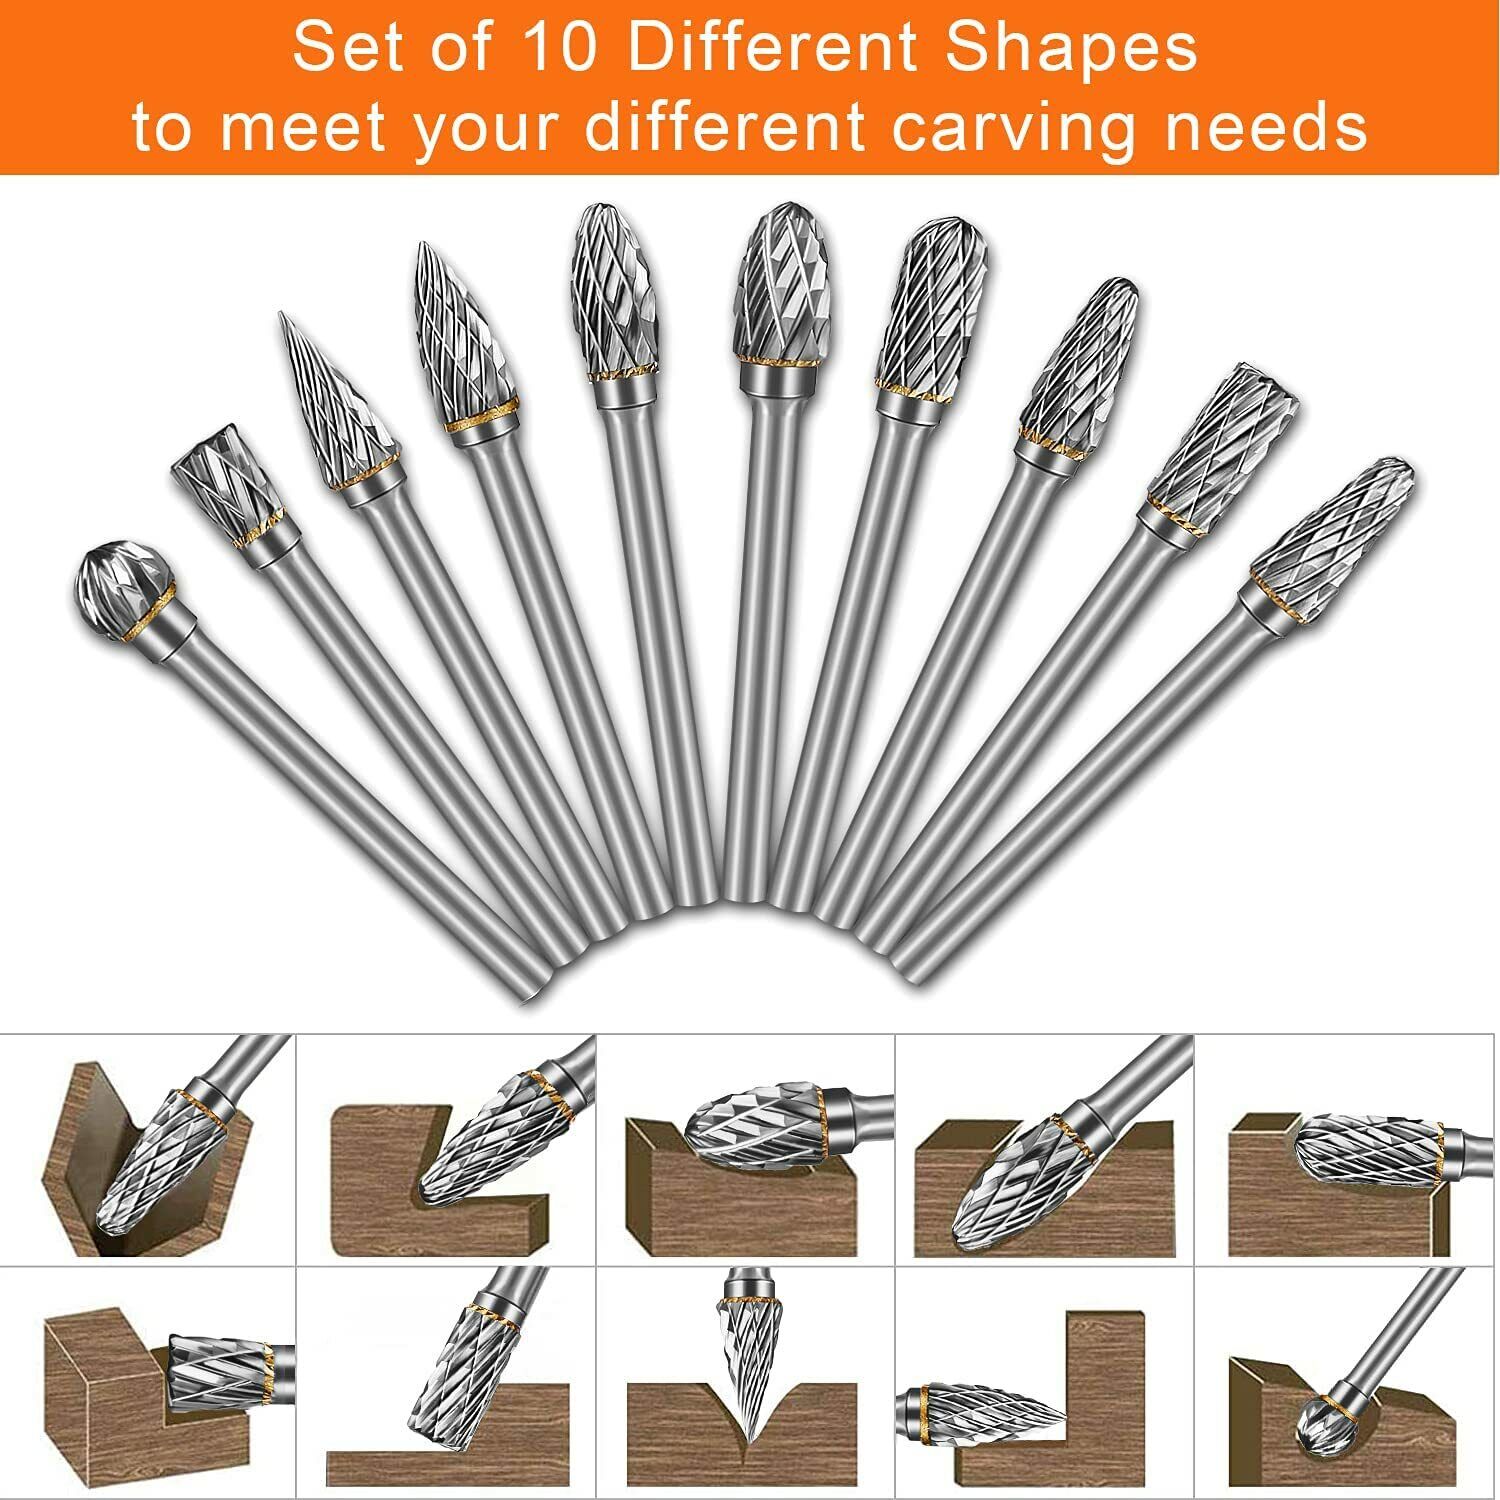 Tungsten Carbide Rotary Burr Bit Set 1/8" Cutting Carving Burrs for Dremel Tool Satc Does Not Apply - фотография #5